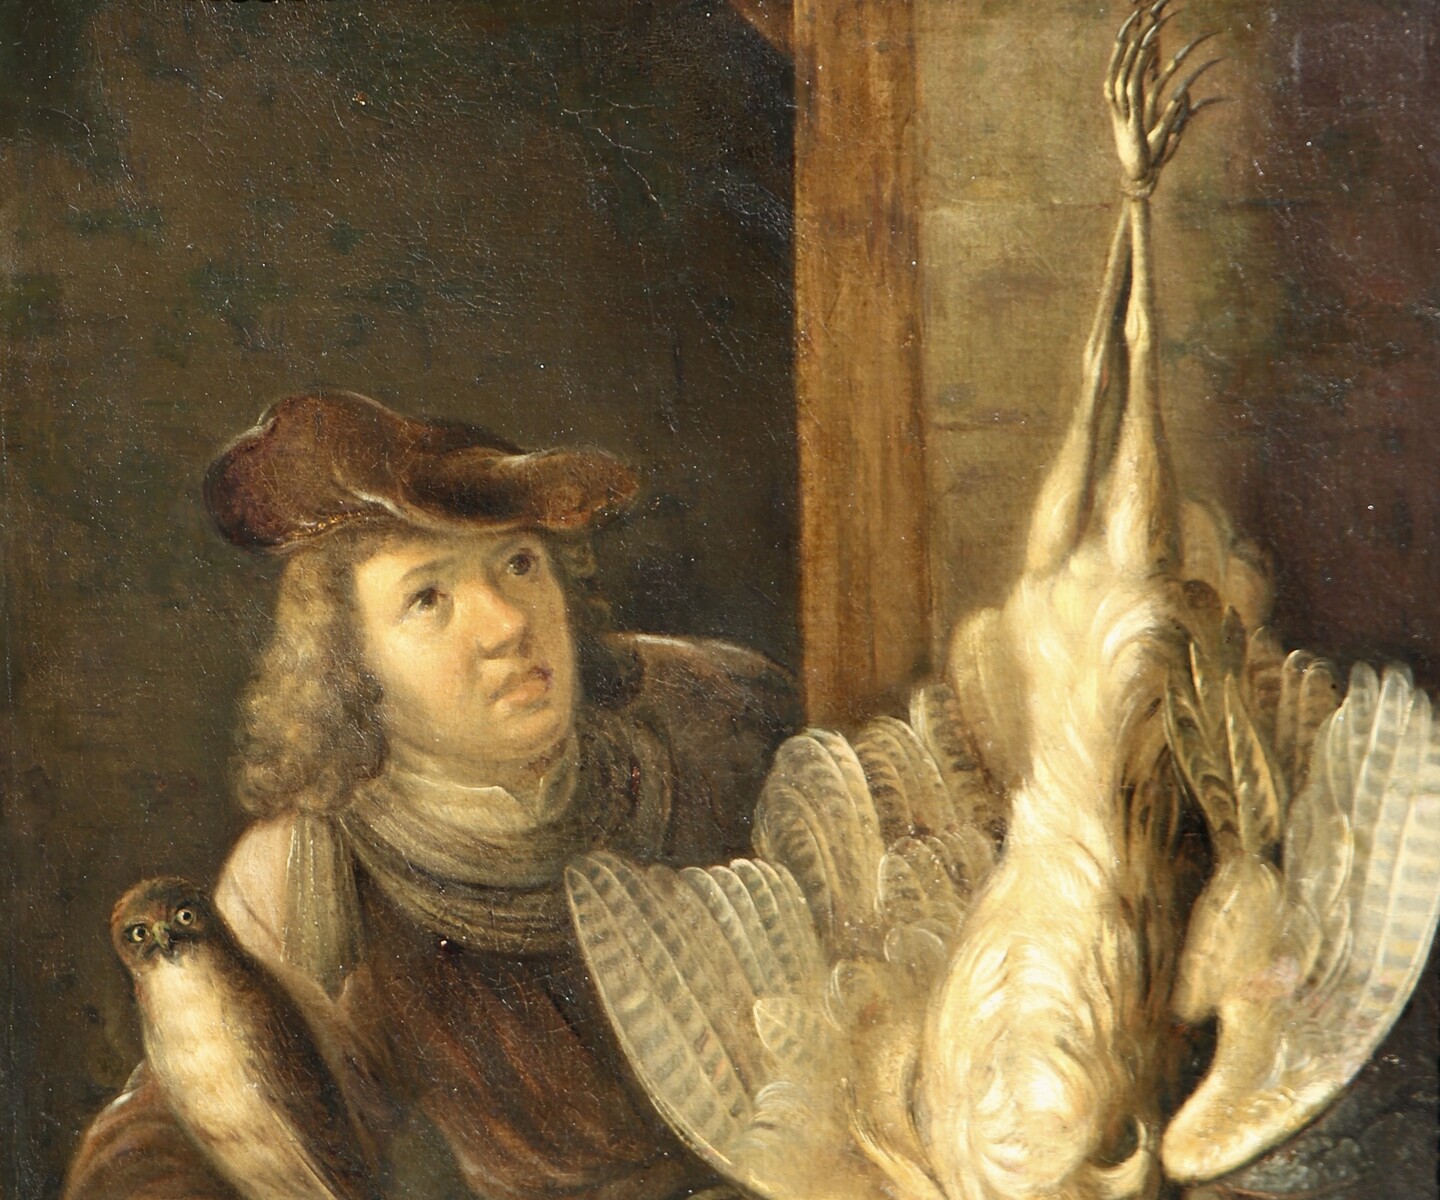 A falconer posing with his catch